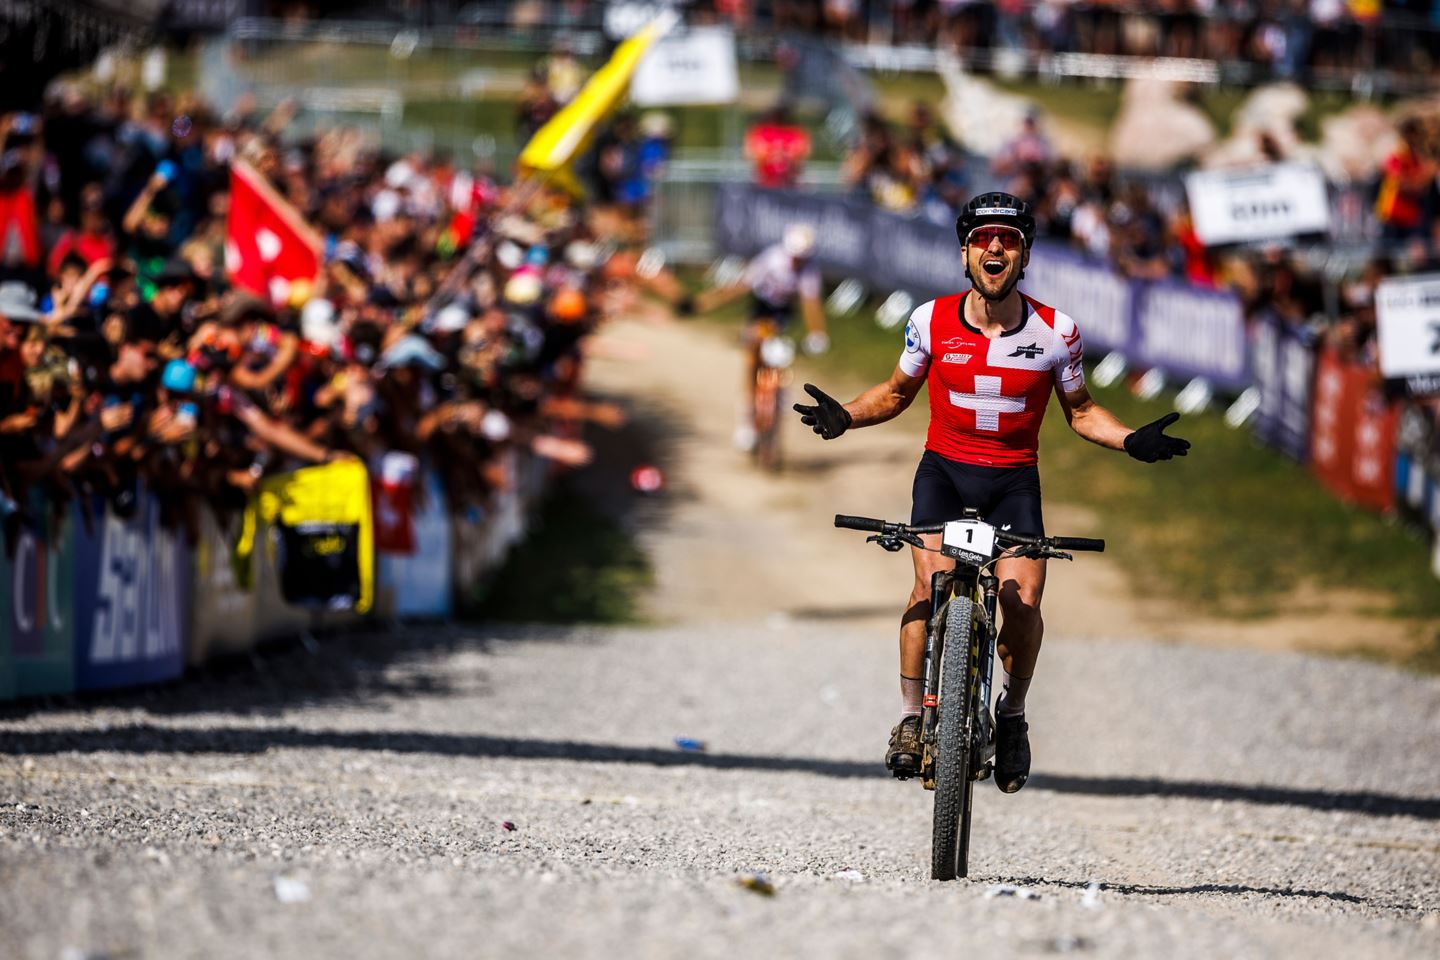 Nino Schurter crosses the line for his tenth World Championship title in Elite XCO.